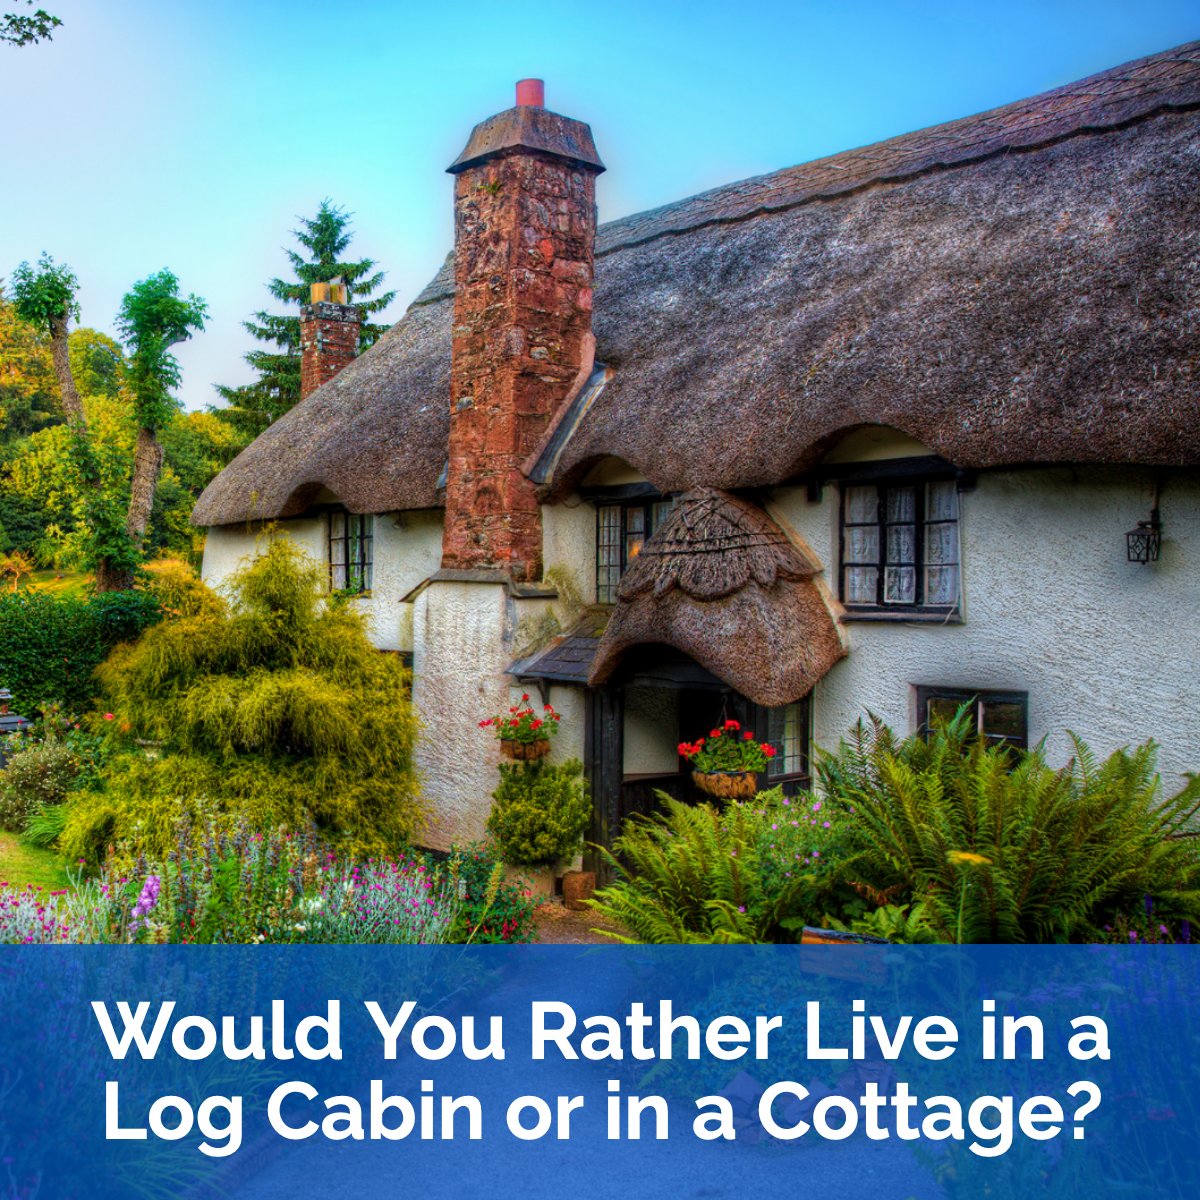 Would you rather live in a woodsy log cabin or in a cozy cottage? 

Cast your vote in the comments! 👇

#cottage #logcabin #question #cozy
 #Toronto #RealEstate #DavisvilleVillage #MidtownToronto #HomesForSaleToronto #ManitoulinIsland #PropertiesForSale #HeideHeemsoth